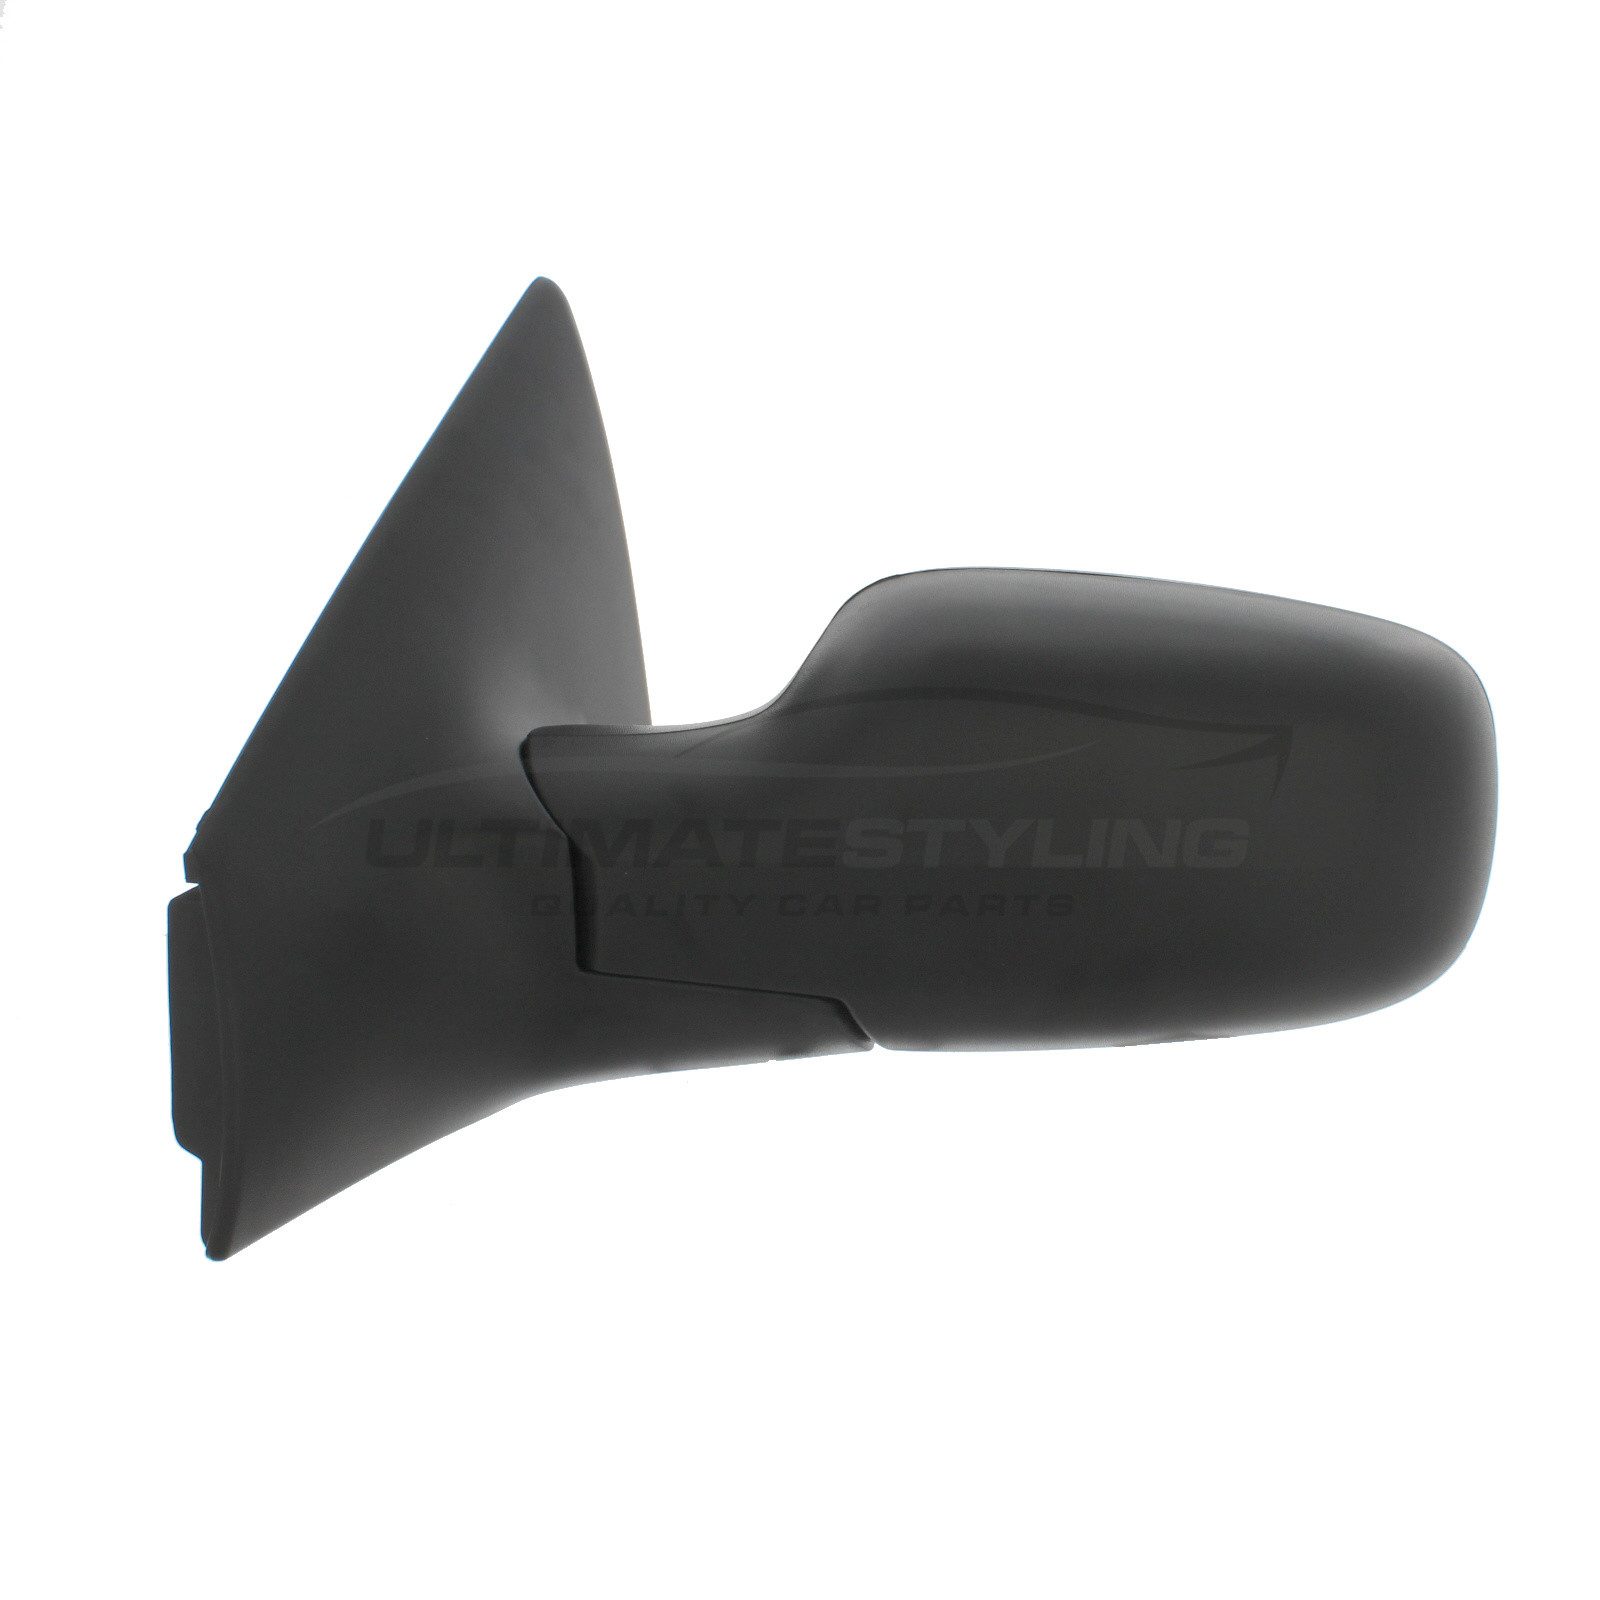 Renault Megane Wing Mirror / Door Mirror - Passenger Side (LH) - Cable adjustment - Non-Heated Glass - Black